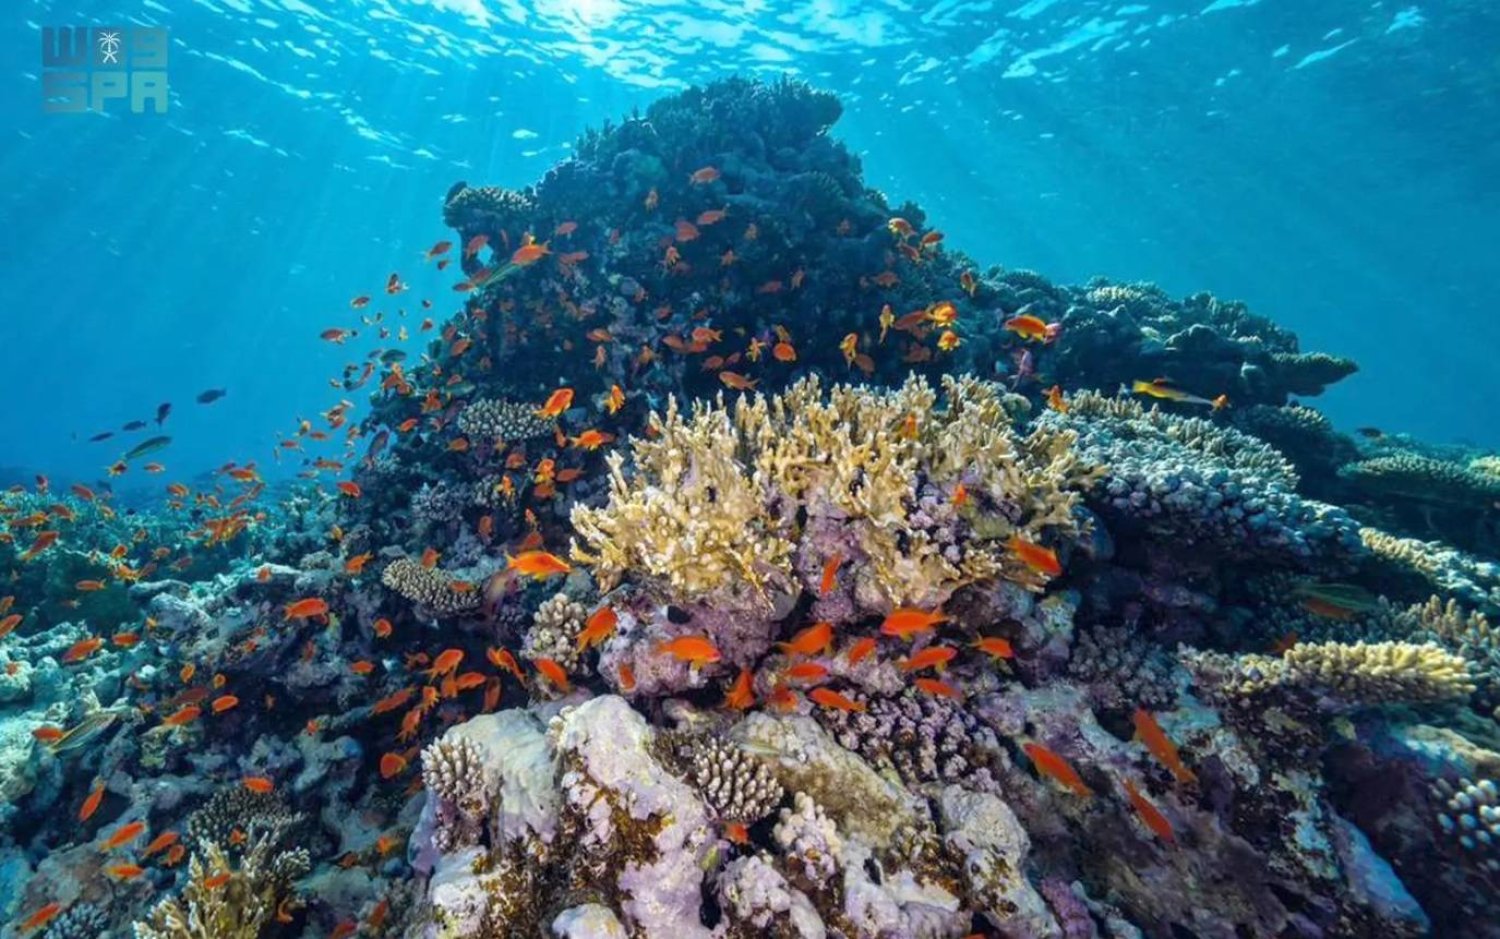 KCRI is the world's largest coral restoration project, aiming to restore reefs worldwide. SPA